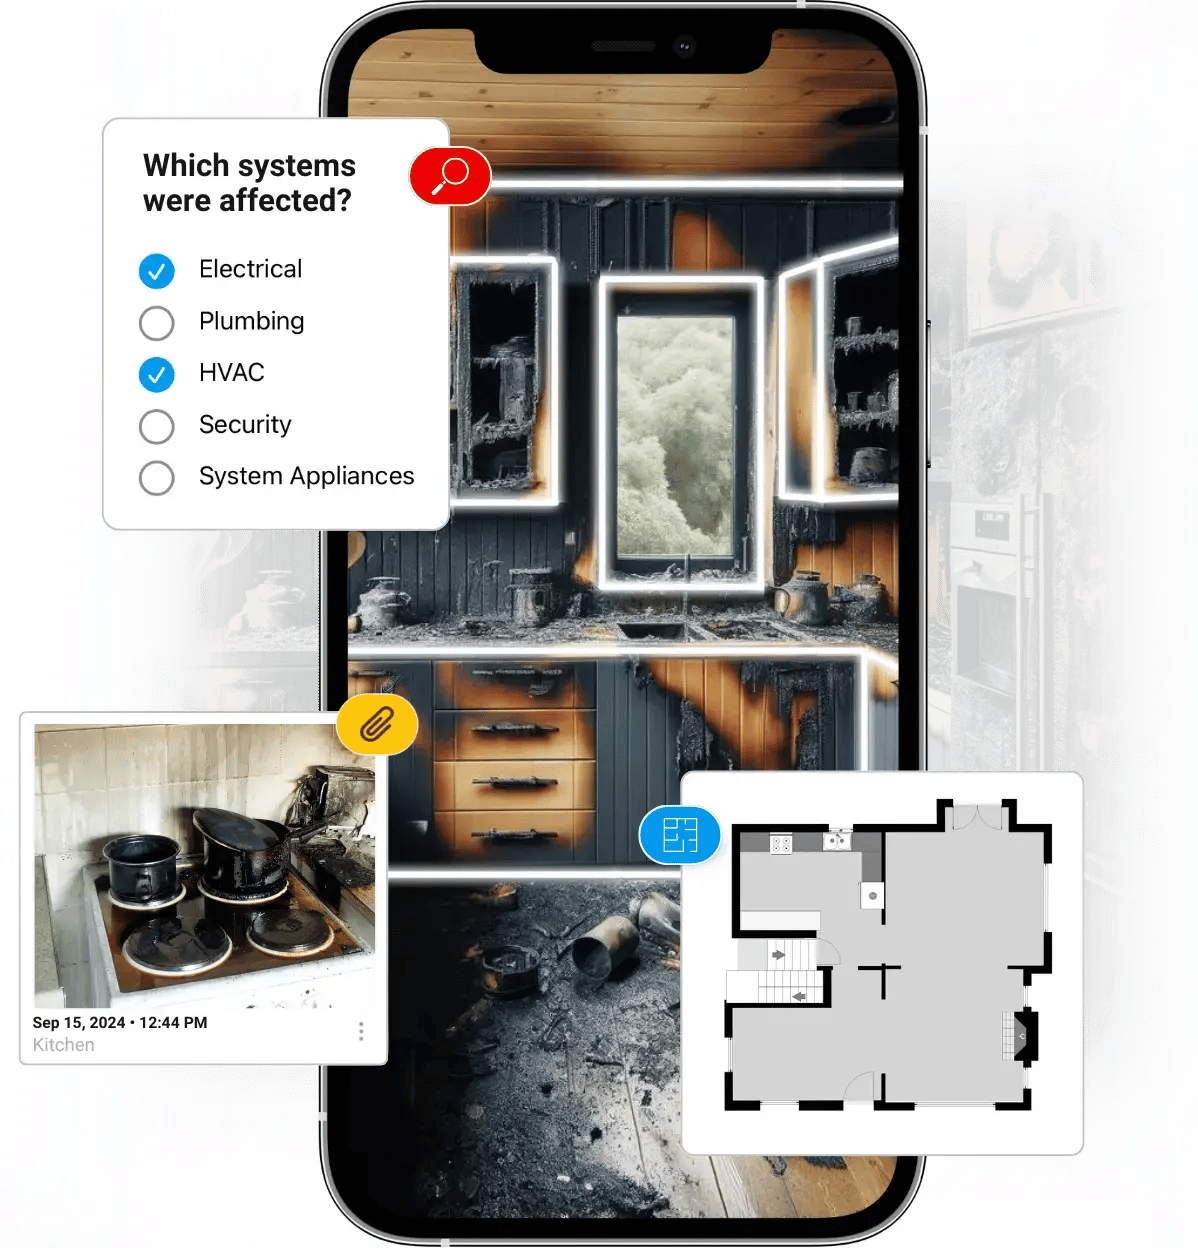 Inspection property fire loos with floor plan sketch, photos and checklist on iPhone using LiDAR.